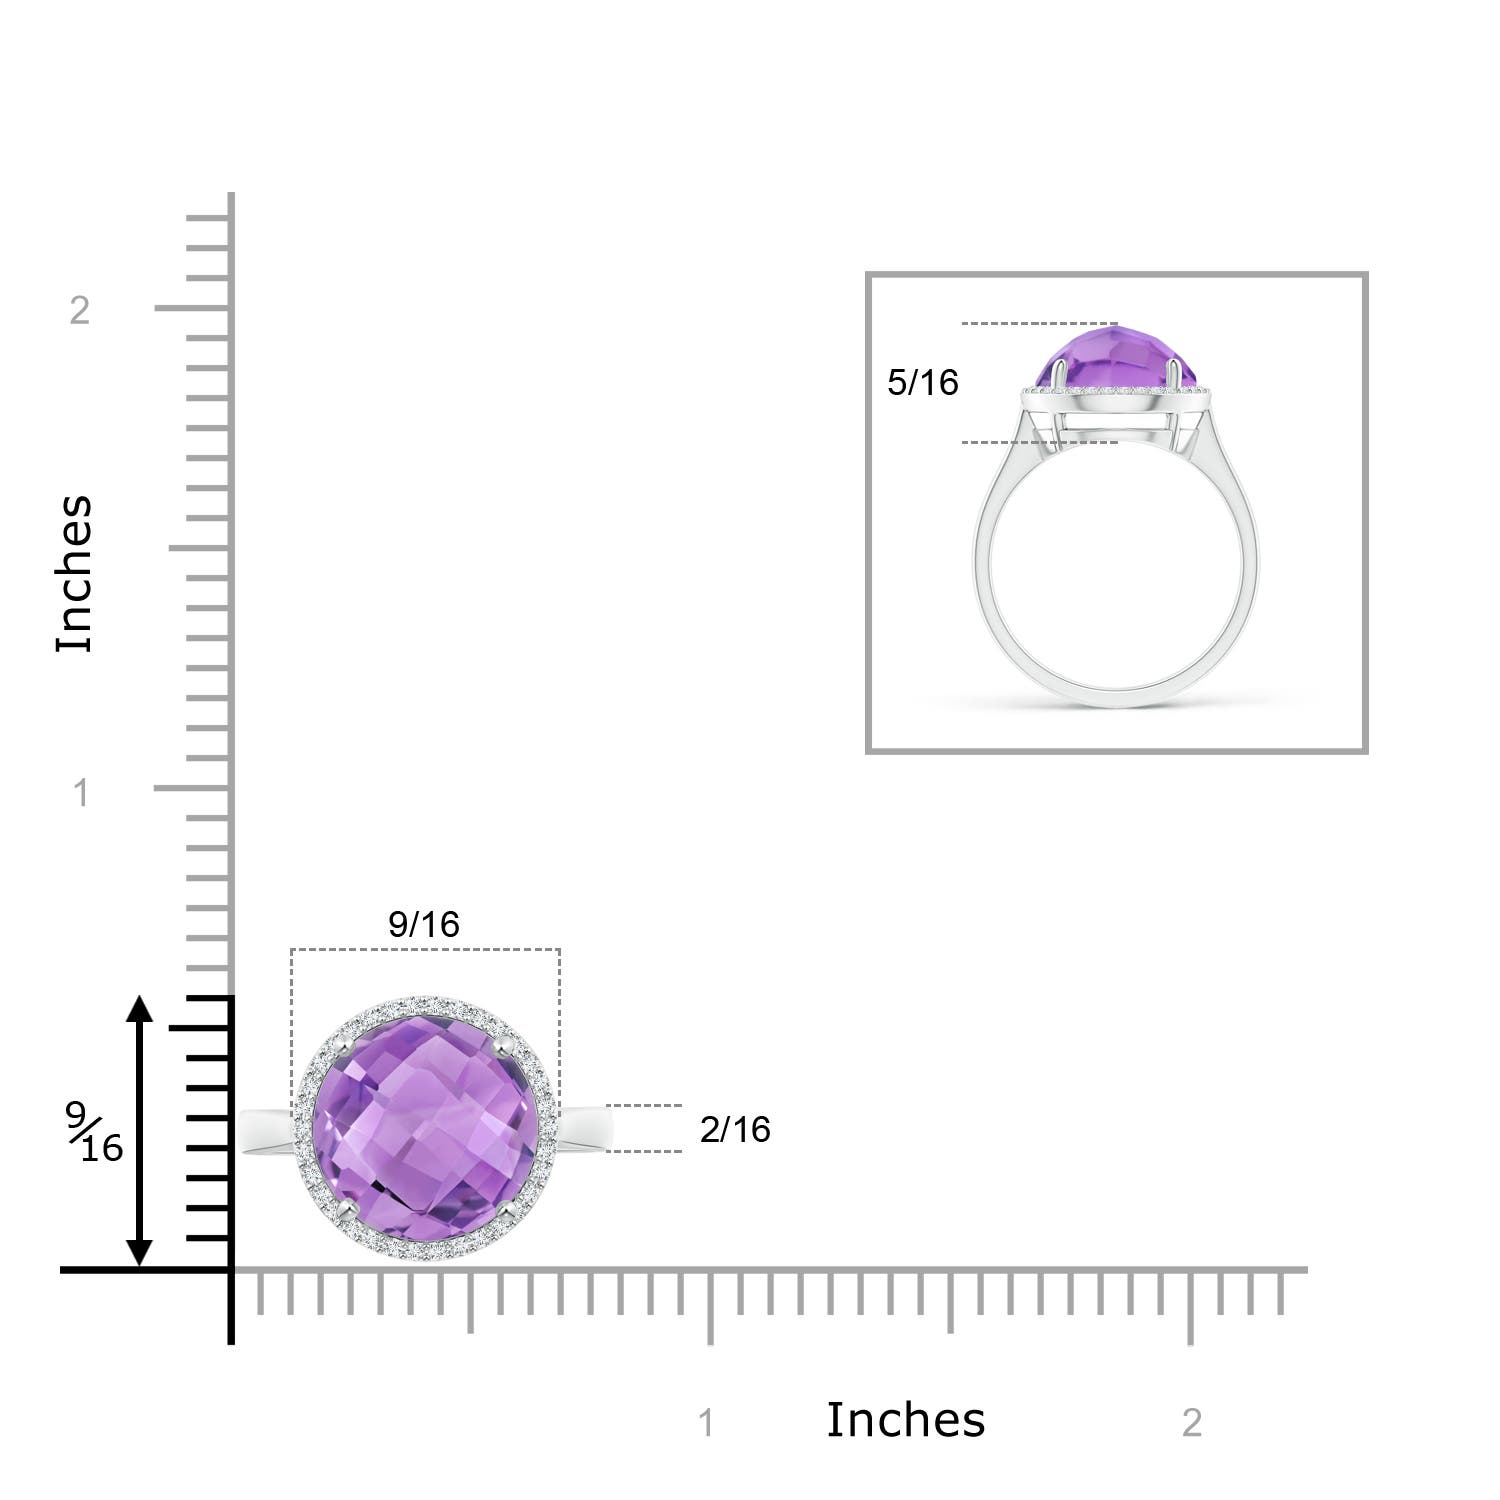 A - Amethyst / 5.7 CT / 14 KT White Gold